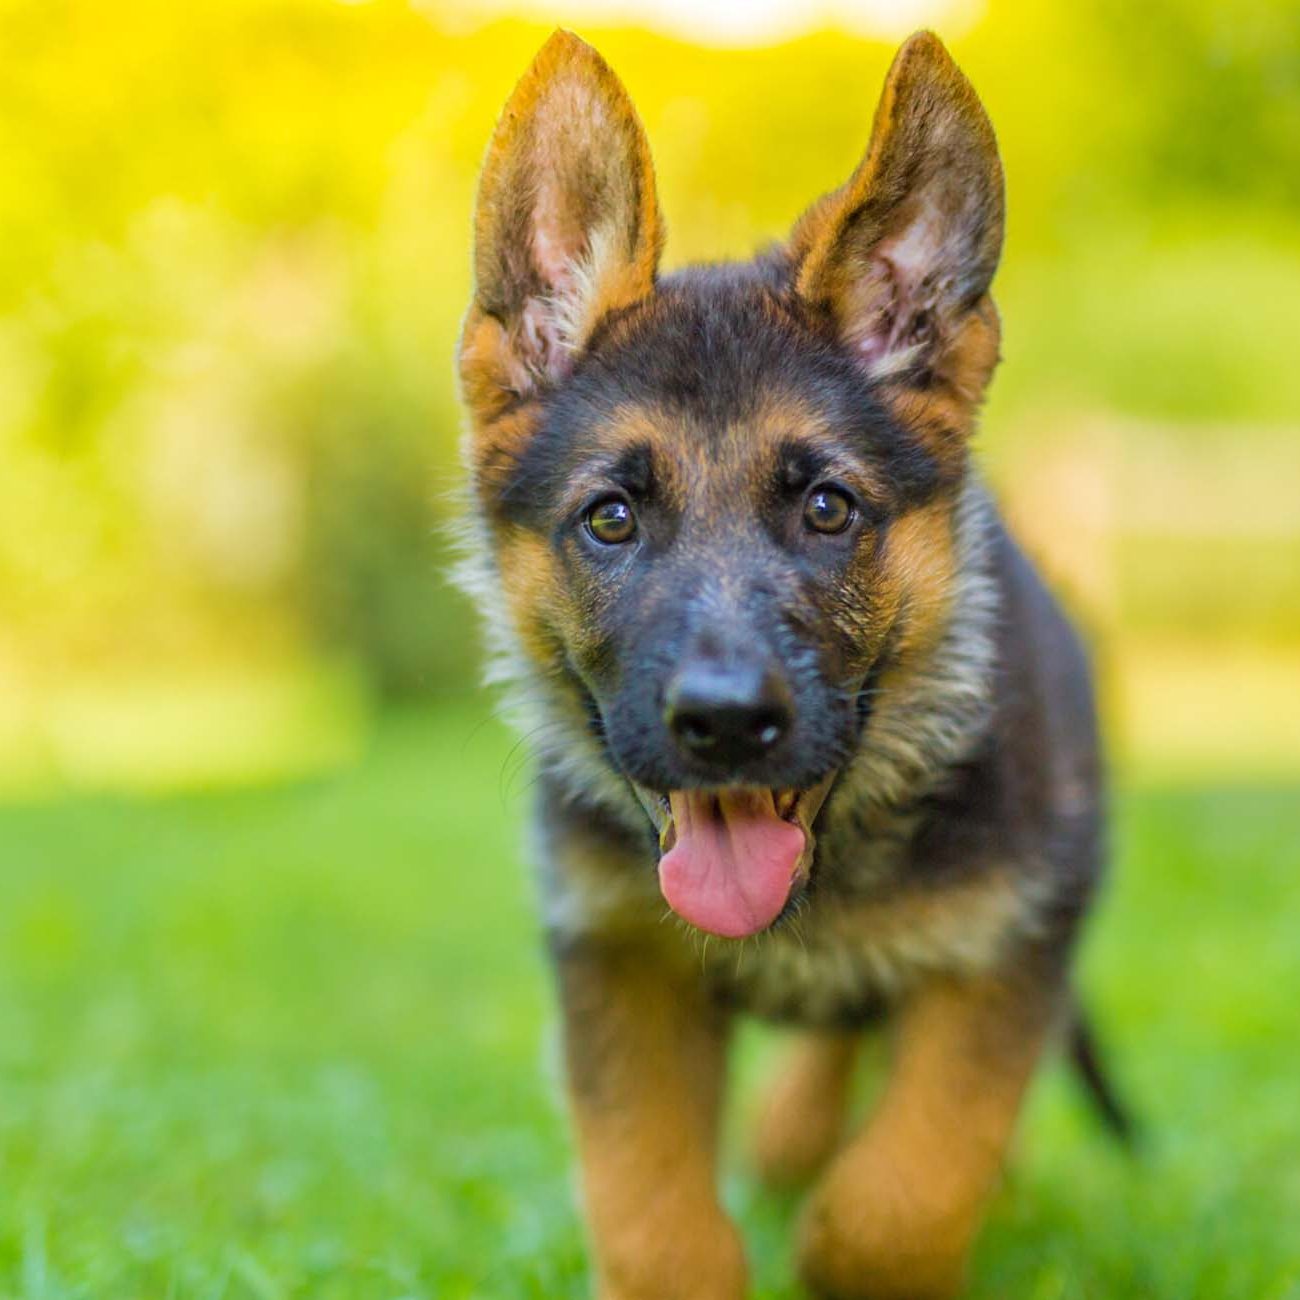 German Shepherd puppy playing outdoors in grass over blurred background